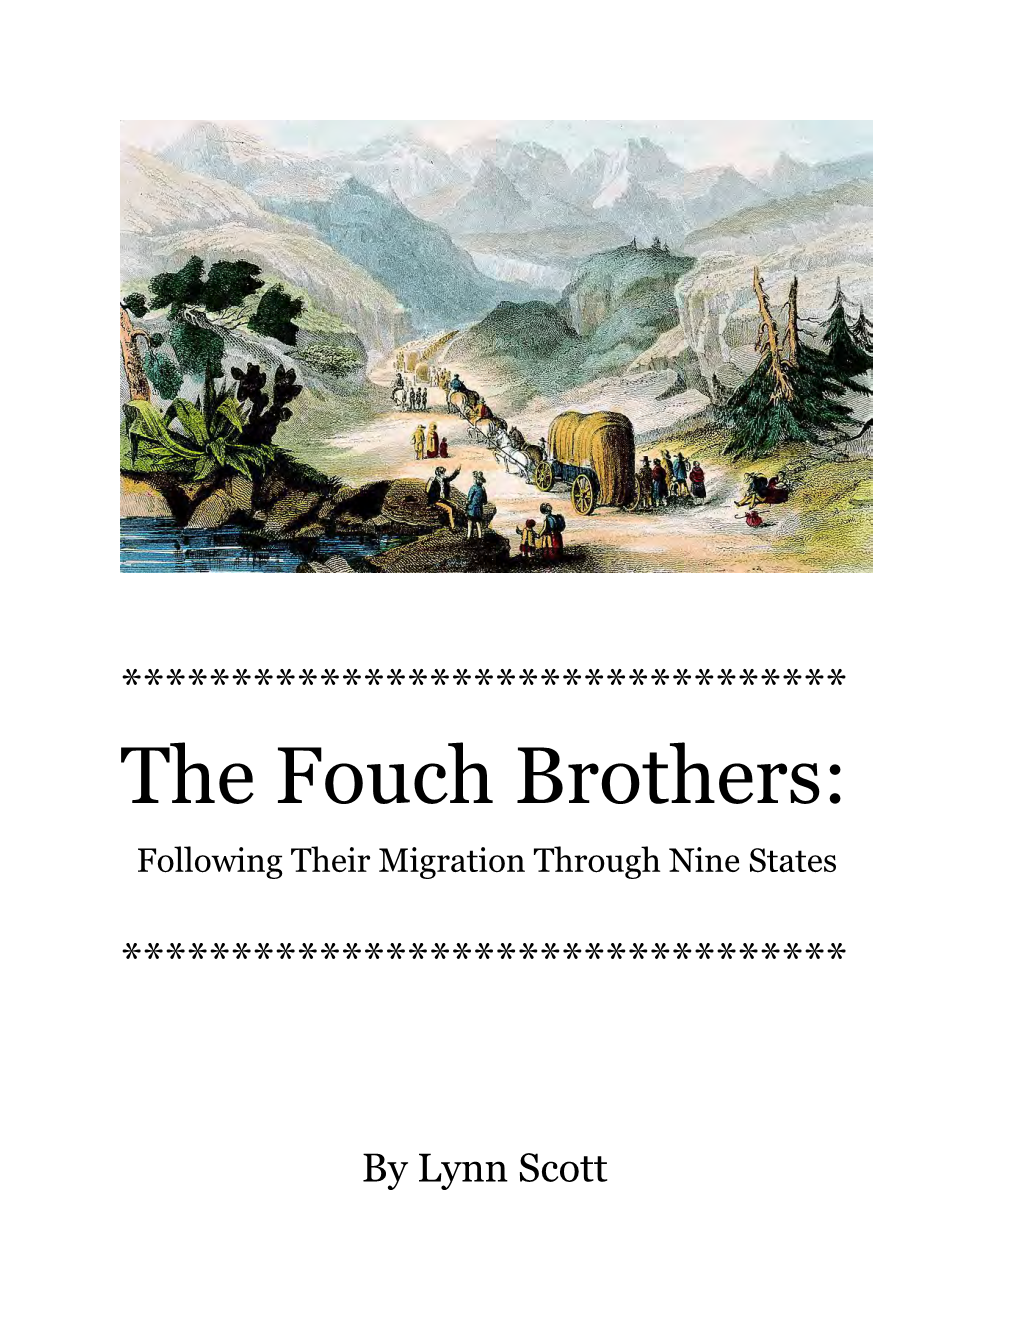 The Fouch Brothers: Following Their Migration Through Nine States